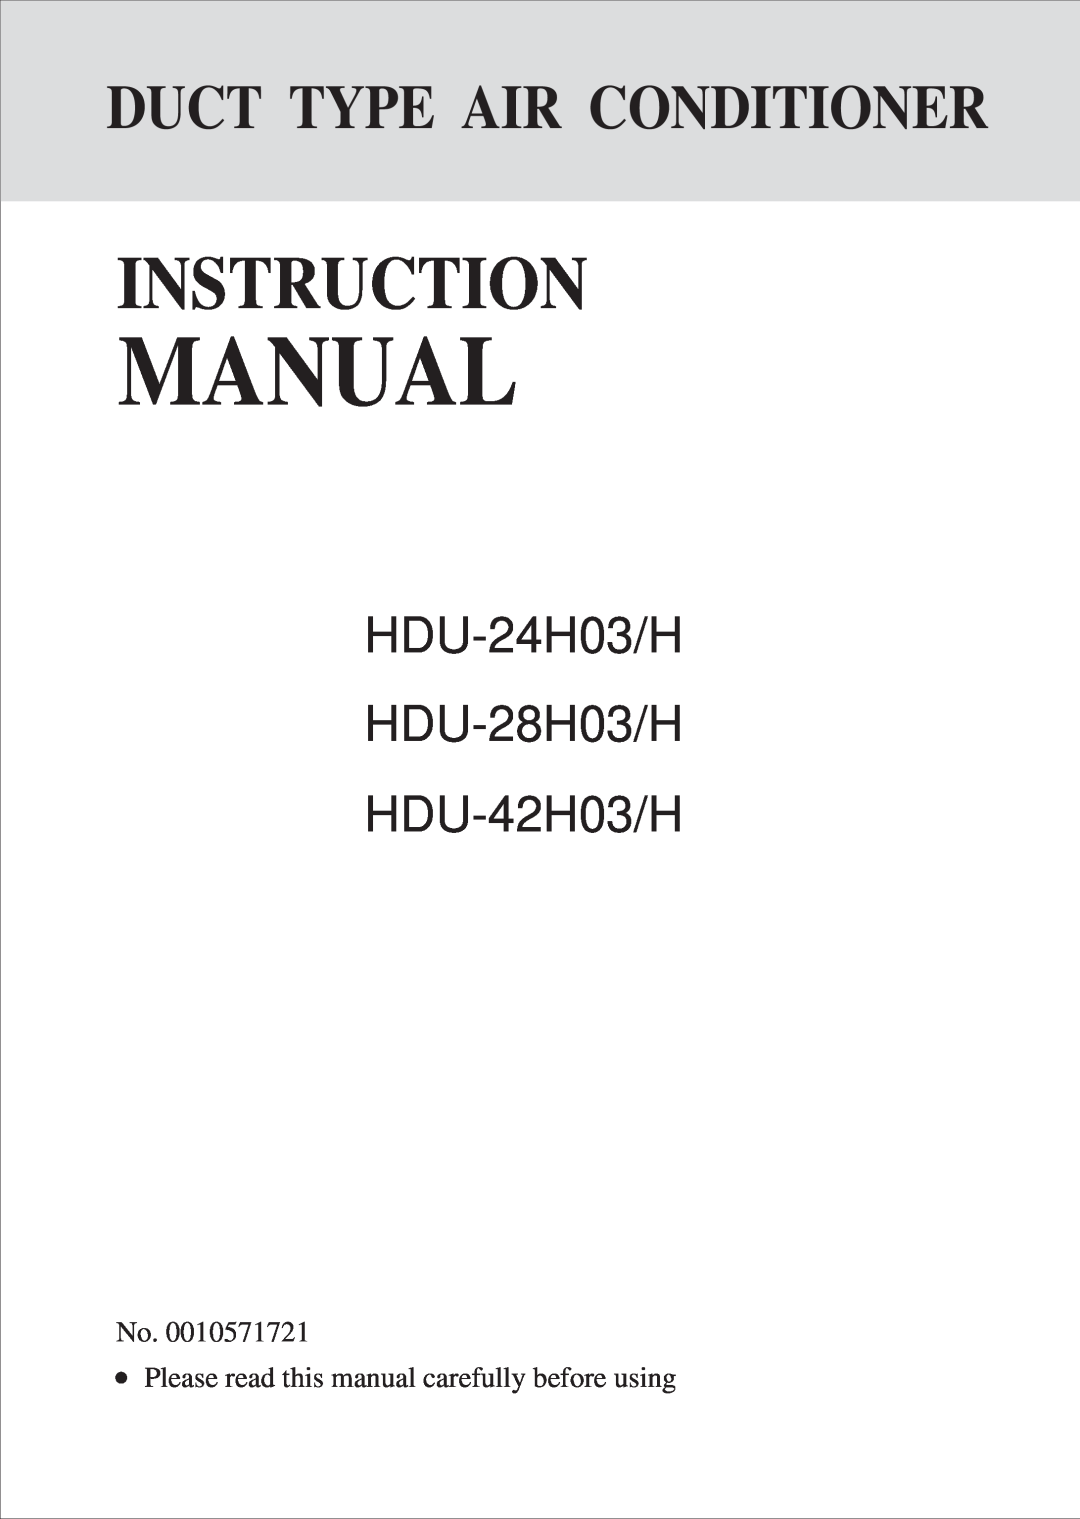 Haier HDU-42H03/H, HDU-24H03/H instruction manual Please read this manual carefully before using, Manual, Instruction 